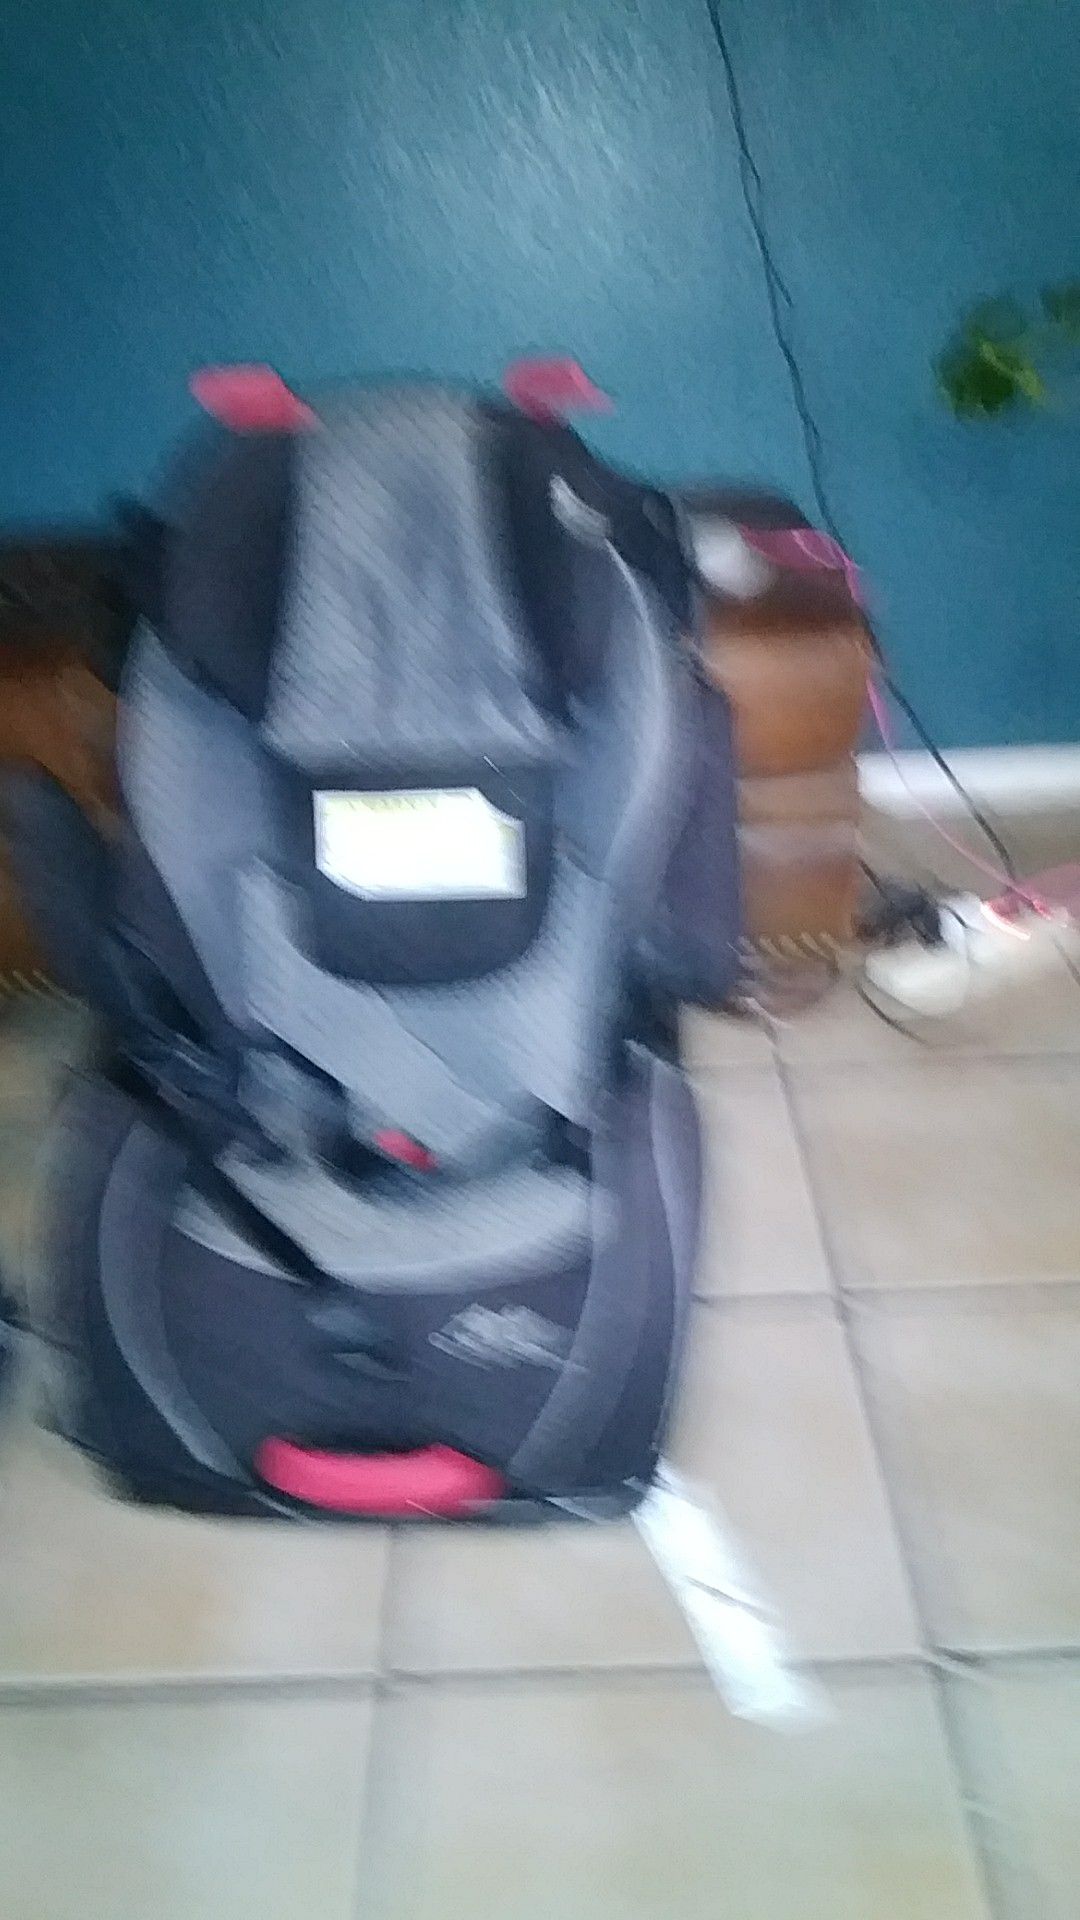 Car seat and the booster seat good condition